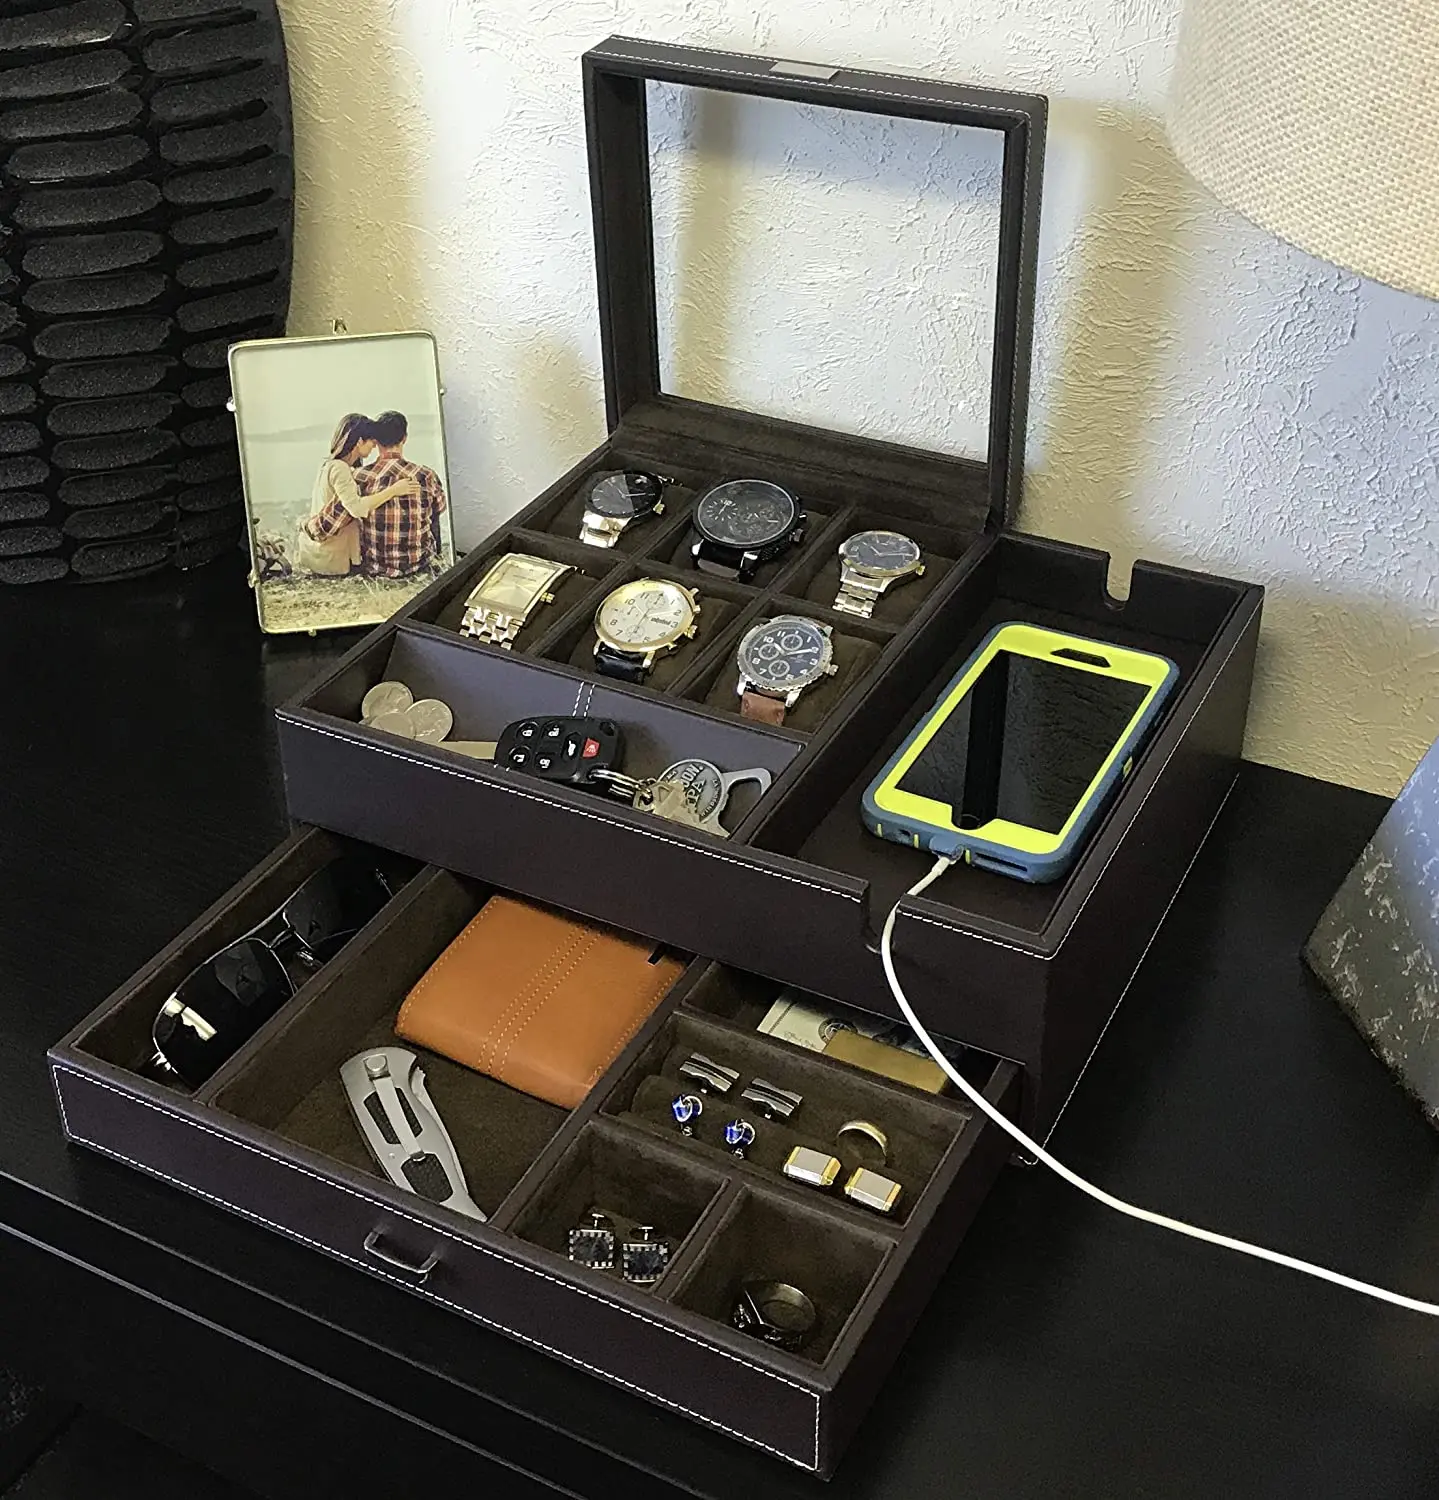 Source Watch Box Case & Men Jewelry Box Organizer with Smartphone Charging  Station (Brown/Brown) on m.